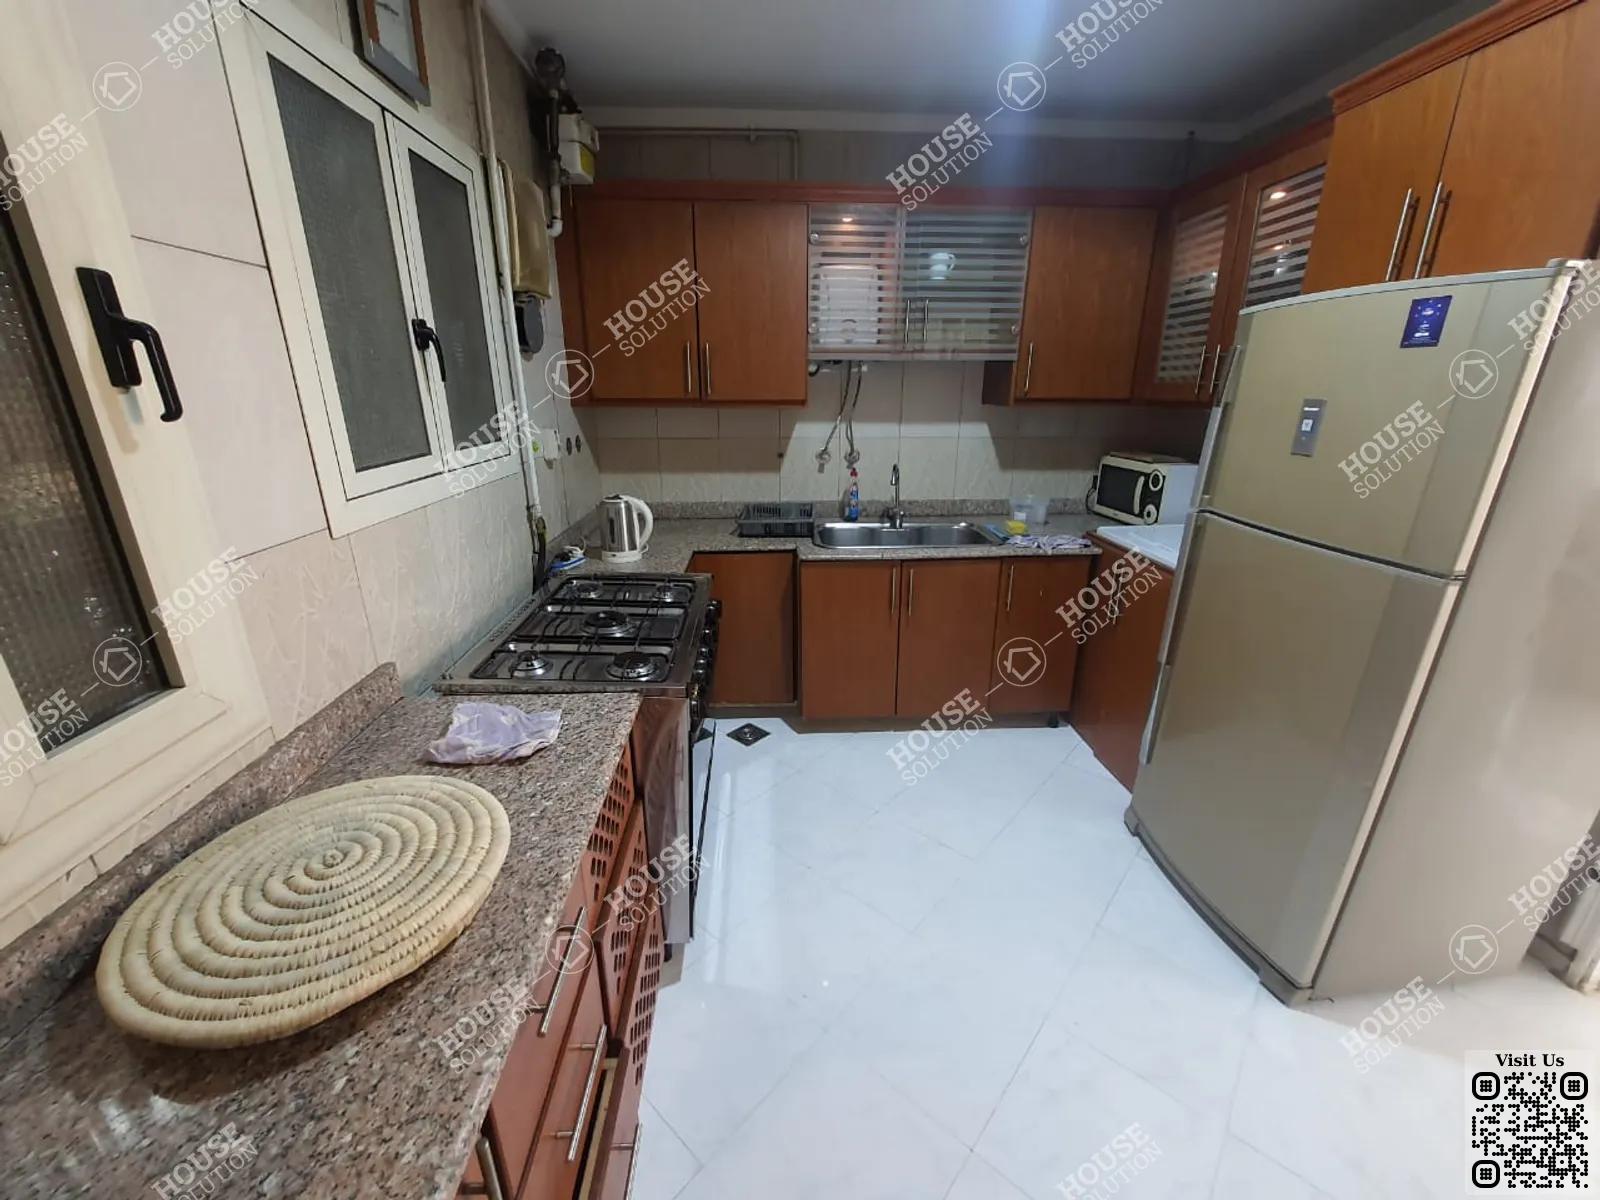 KITCHEN  @ Apartments For Rent In Maadi Maadi Sarayat Area: 200 m² consists of 3 Bedrooms 2 Bathrooms Modern furnished 5 stars #4795-1